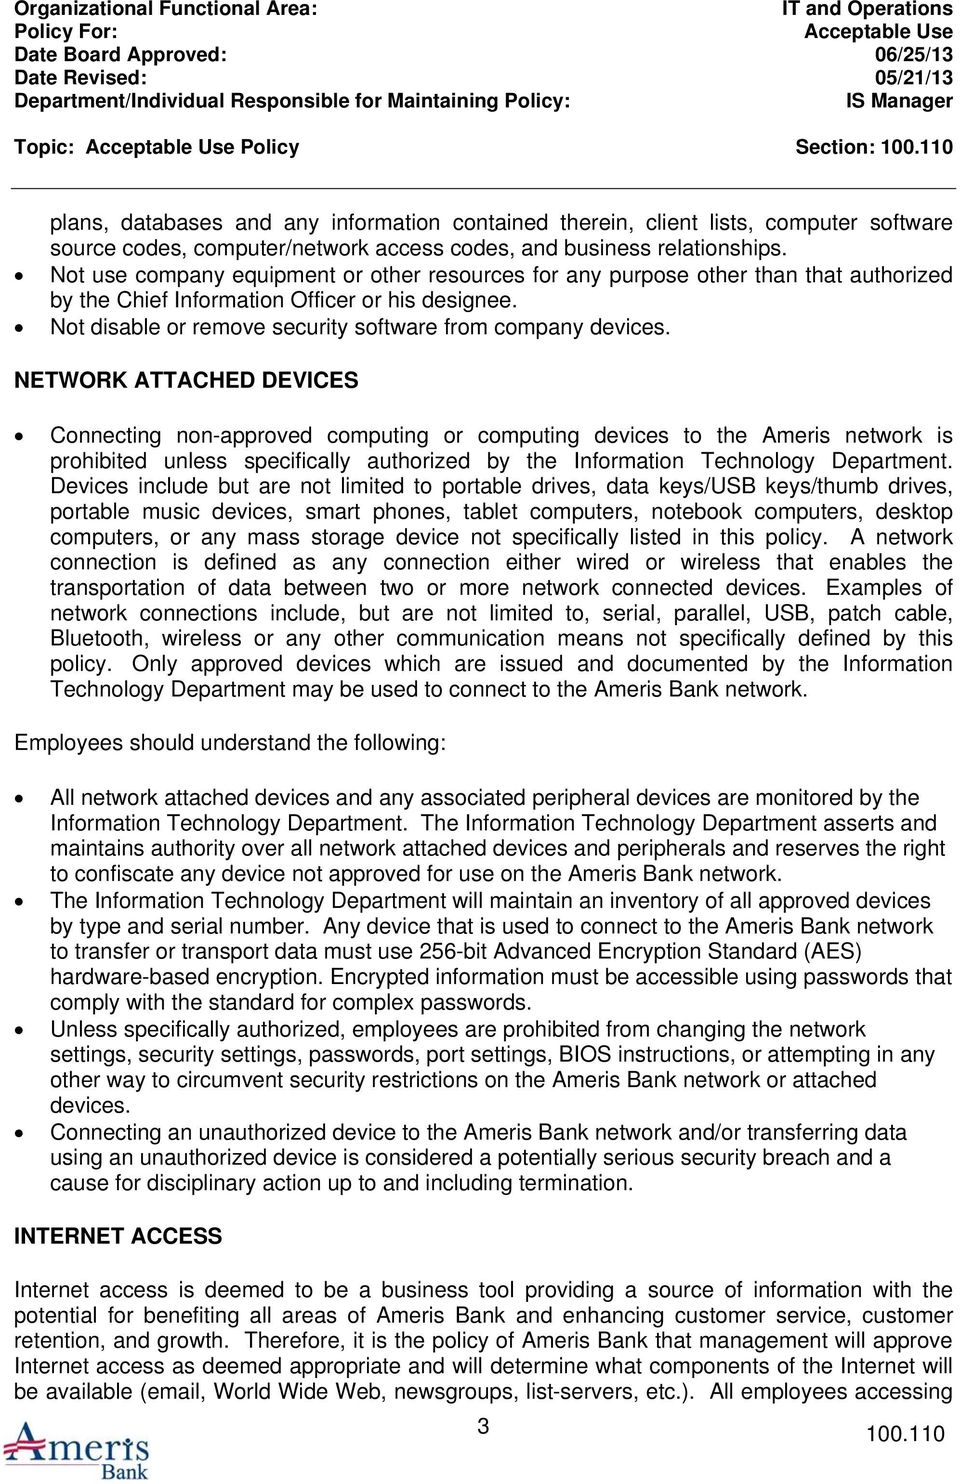 NETWORK ATTACHED DEVICES Connecting non-approved computing or computing devices to the Ameris network is prohibited unless specifically authorized by the Information Technology Department.